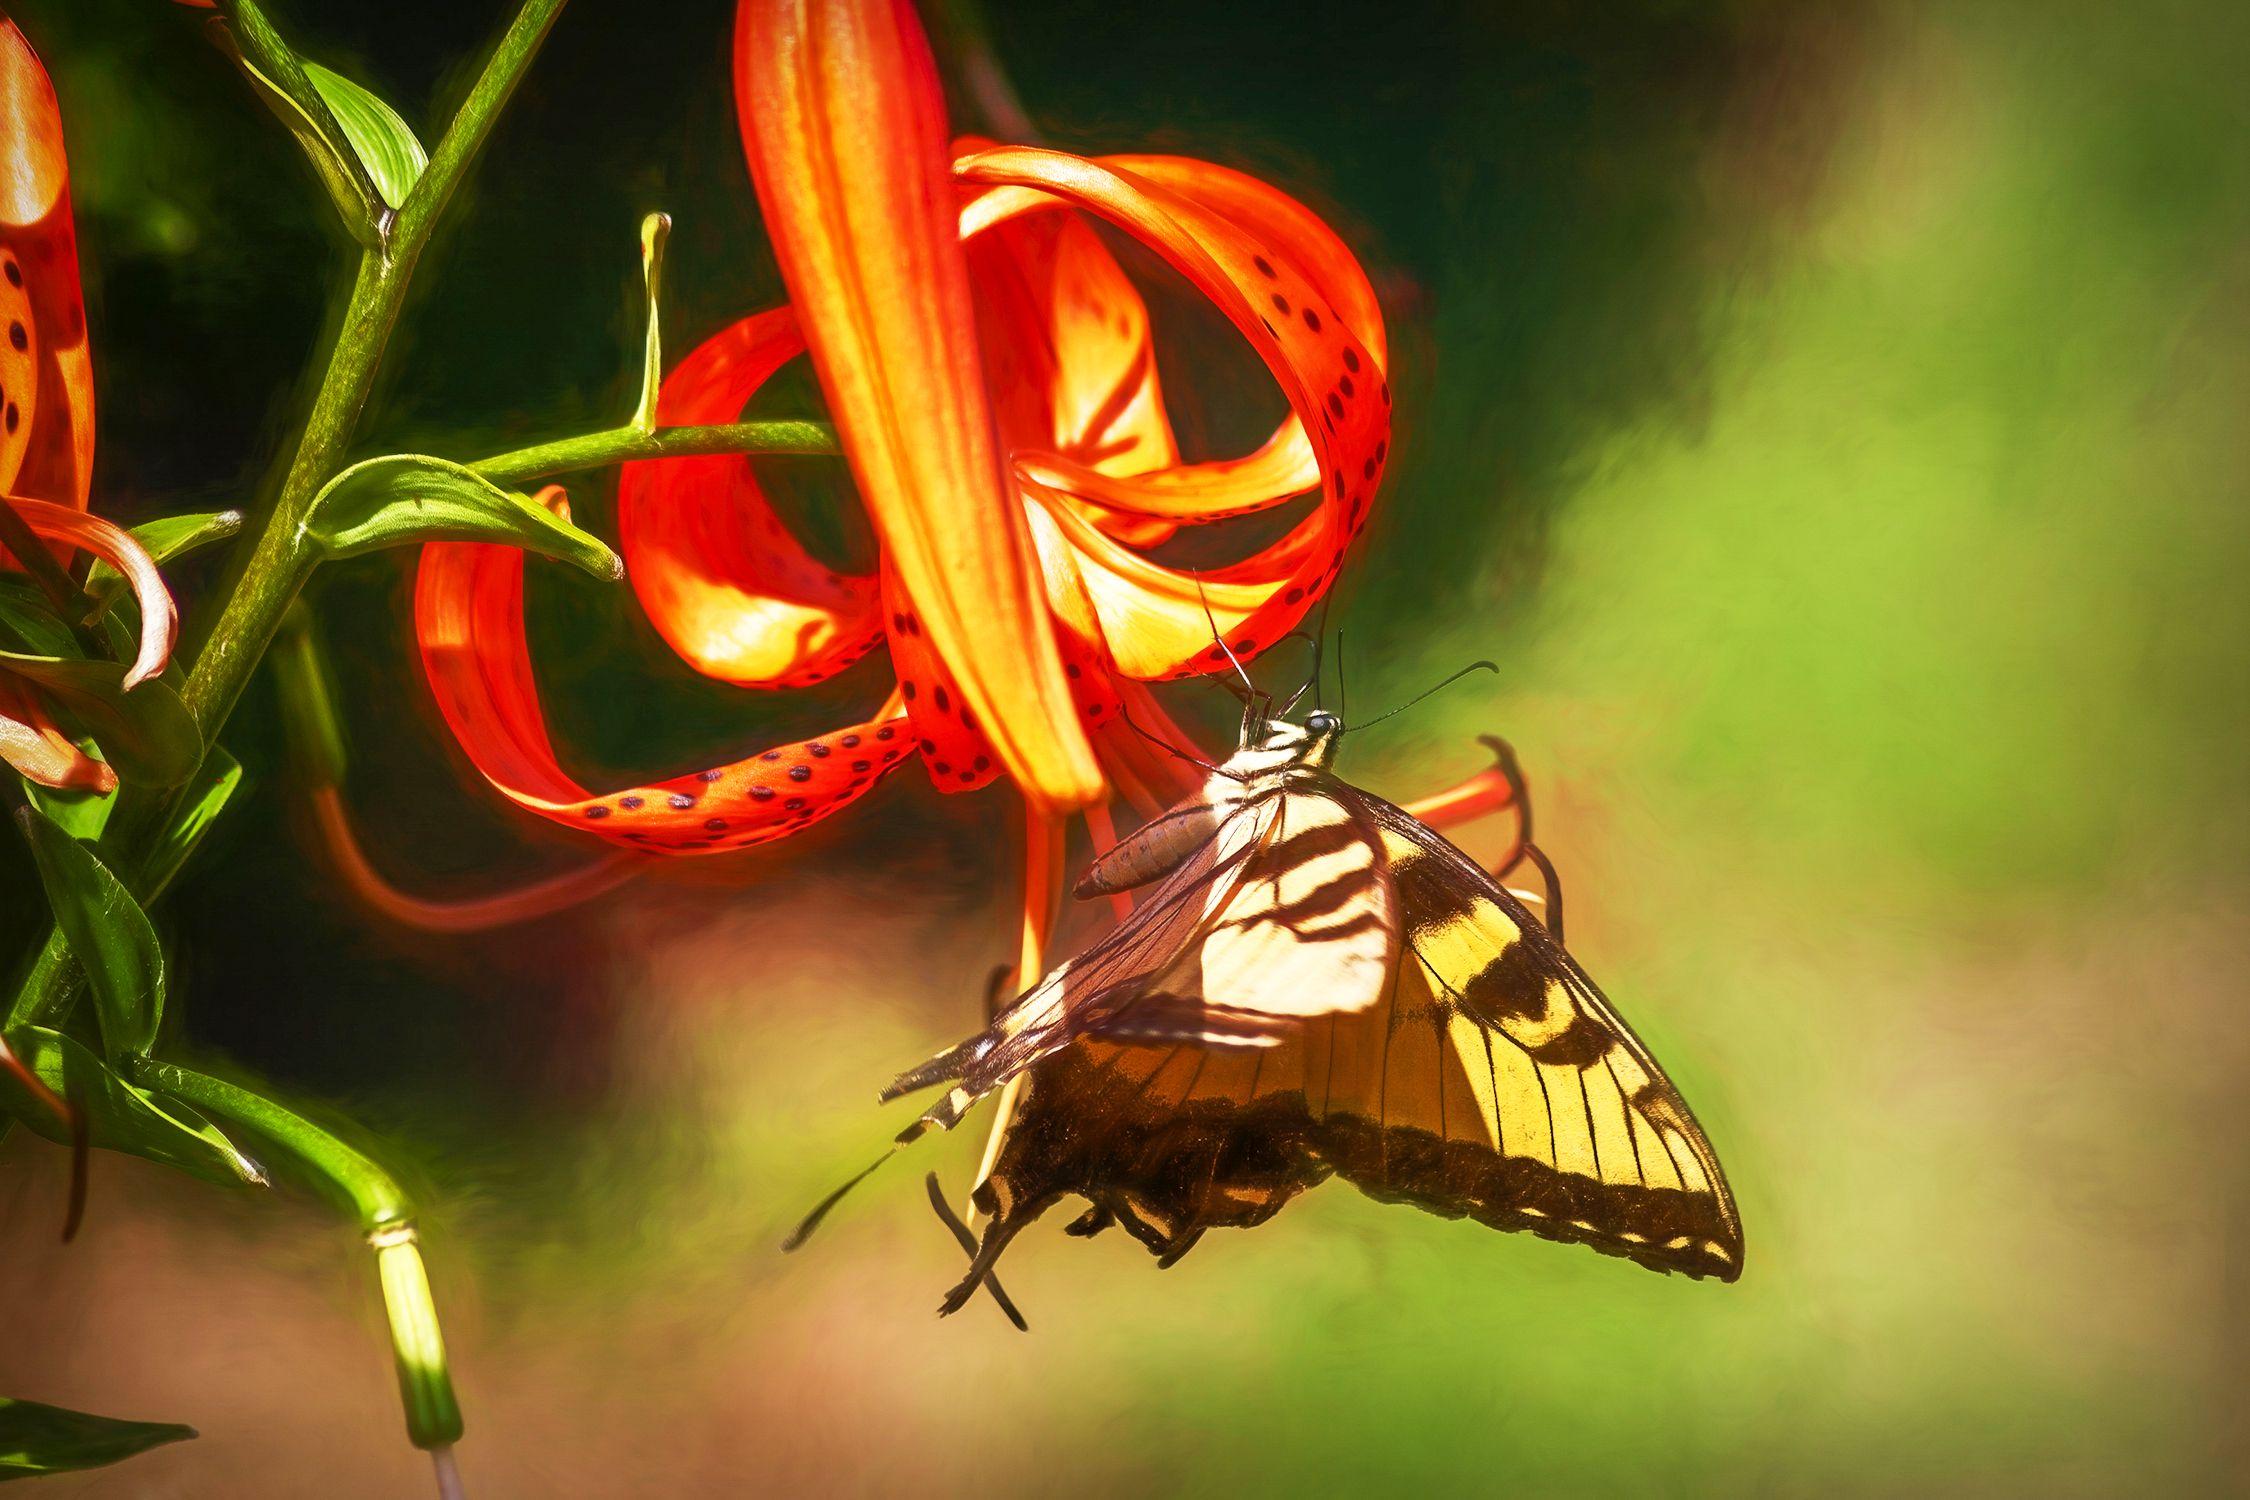 Alicia Pastiran Color Photograph - Swallowtail on Tiger Lilies, Photograph, Archival Ink Jet